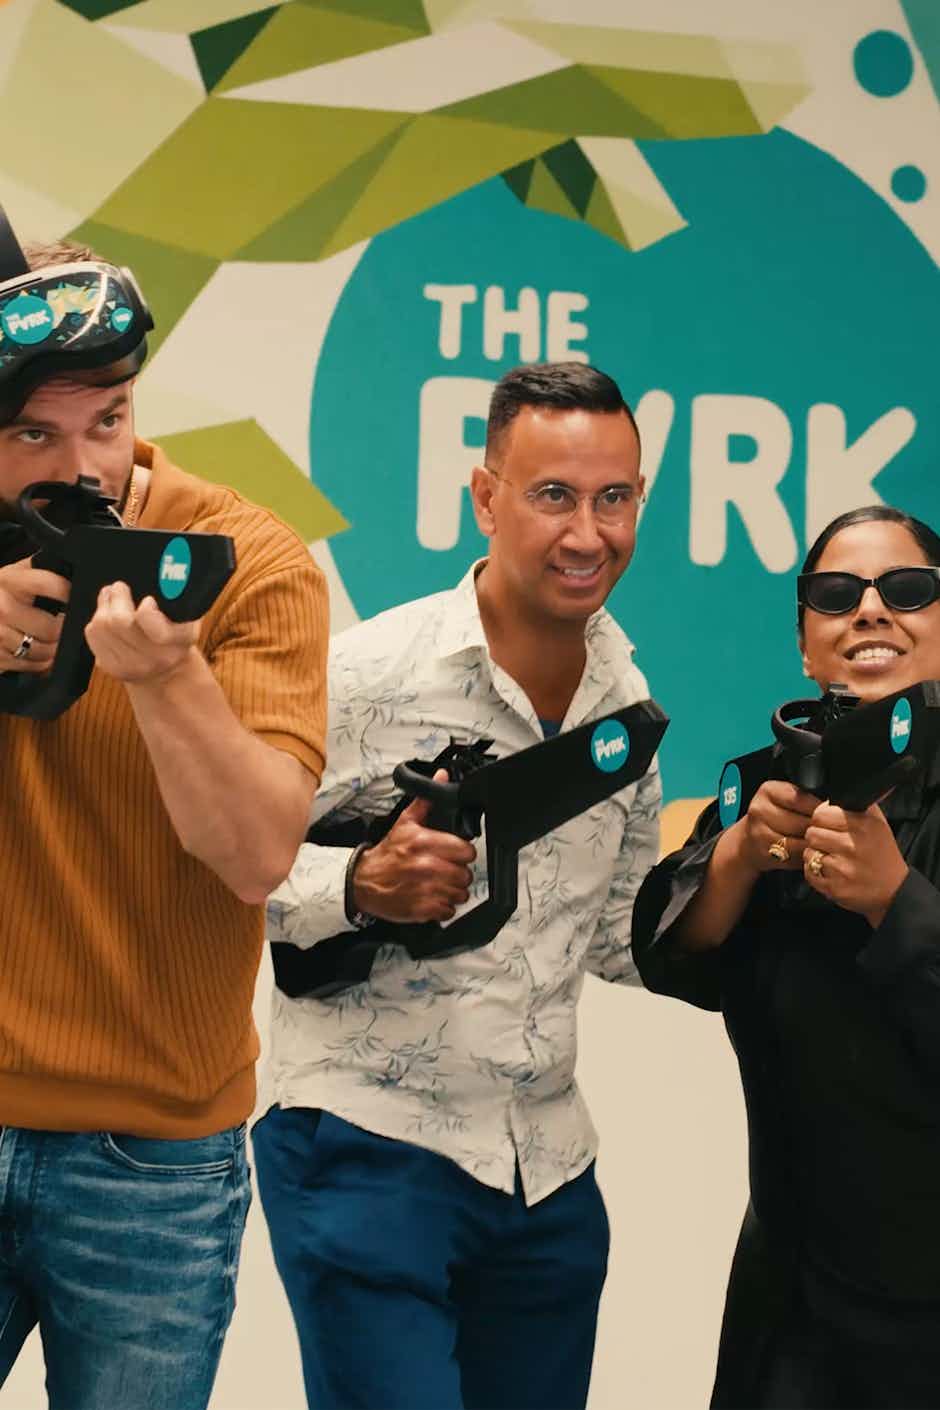 Group of people with vr goggles and guns